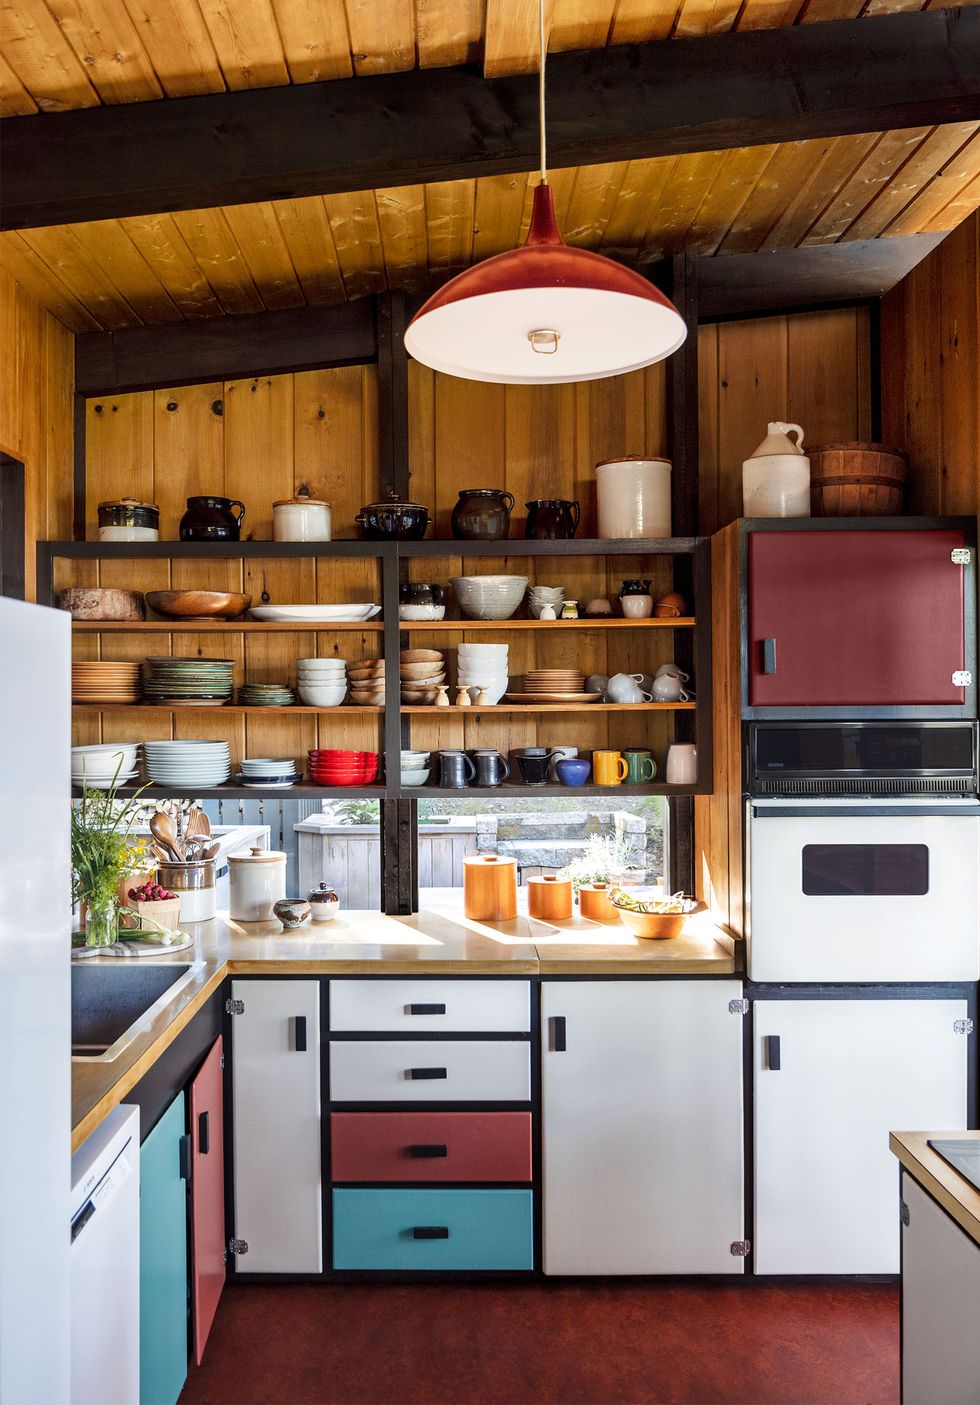 a kitchen has lower cabinets with alternating white, aqua, and deep burgundy colored fronts, open shelving above with plates, cups, and jugs, a red marblelike floor, and a vintage red pendant